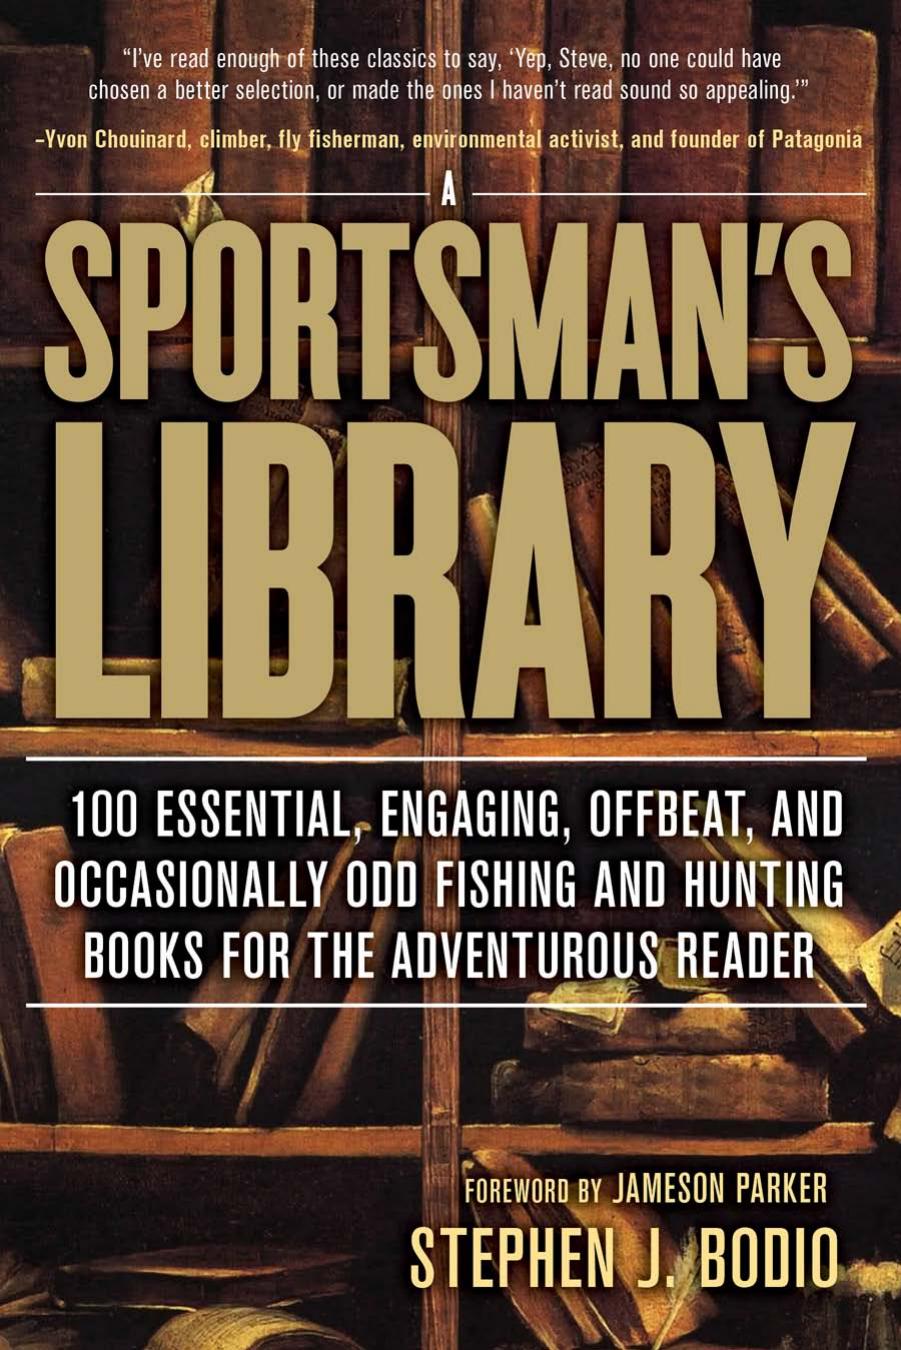 Sportsman's Library: 100 Essential, Engaging, Offbeat, and Occasionally Odd Fishing and Hunting Books for the Adventurous Reader by Stephen Bodio